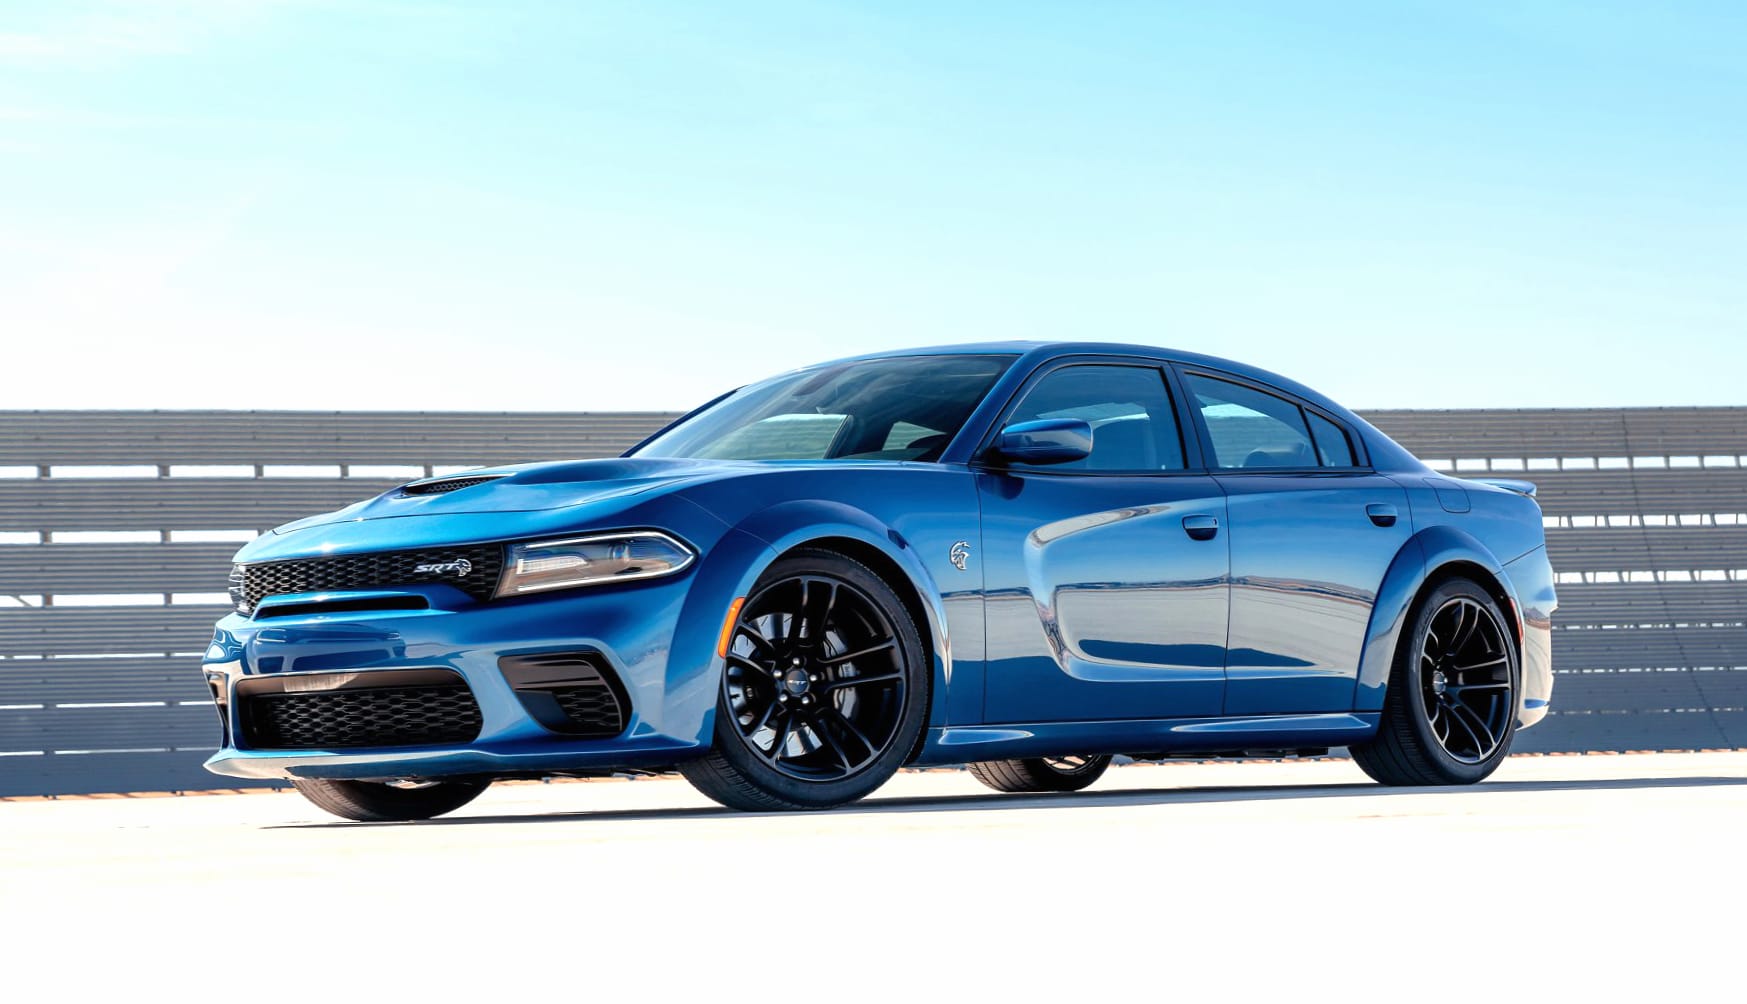 Dodge Charger SRT Hellcat Widebody wallpapers HD quality